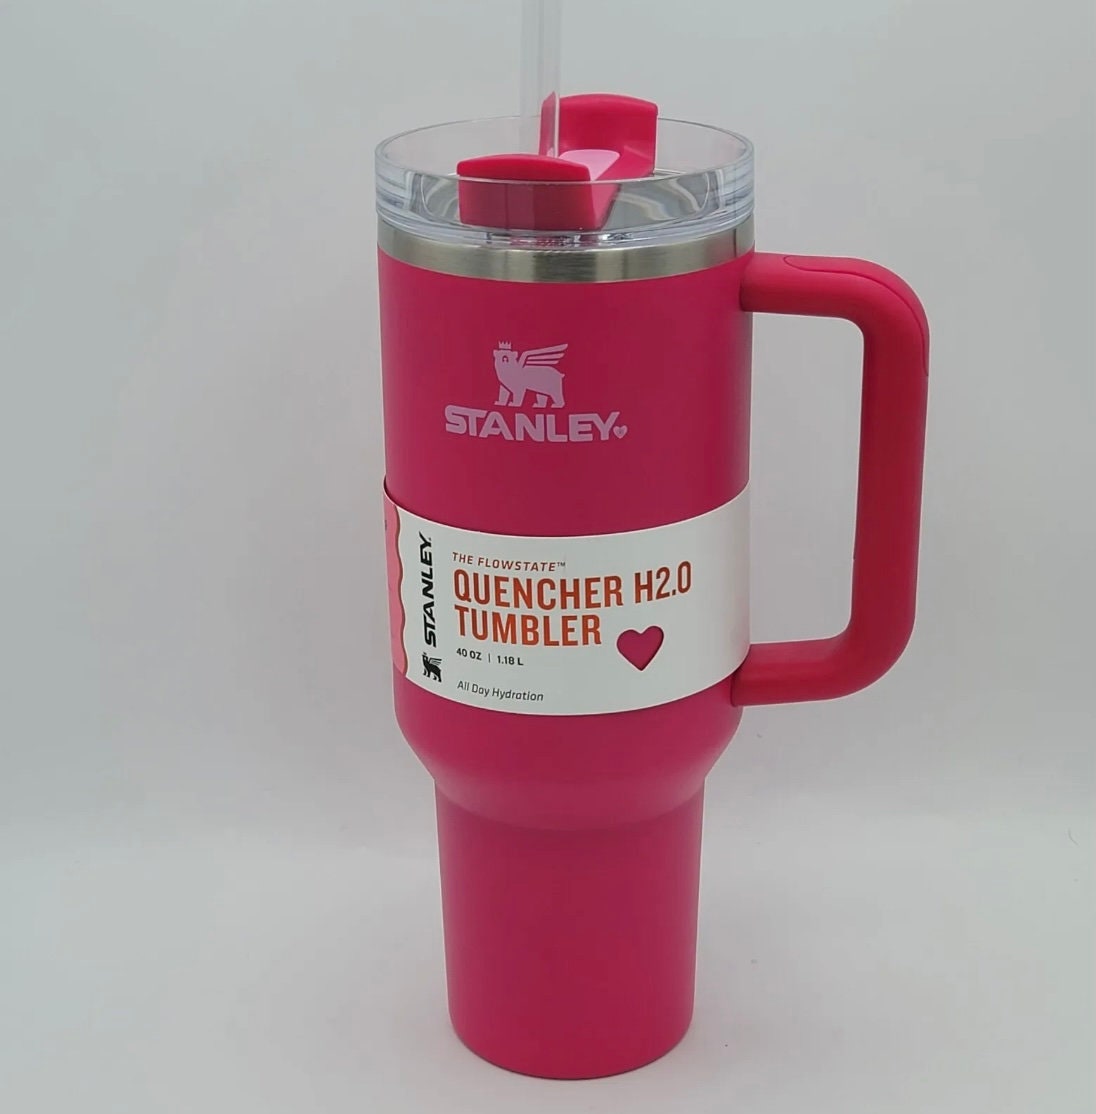 Stanley Cup Quencher H2.0 Tumbler 40oz Peach Target Exclusive In Hand